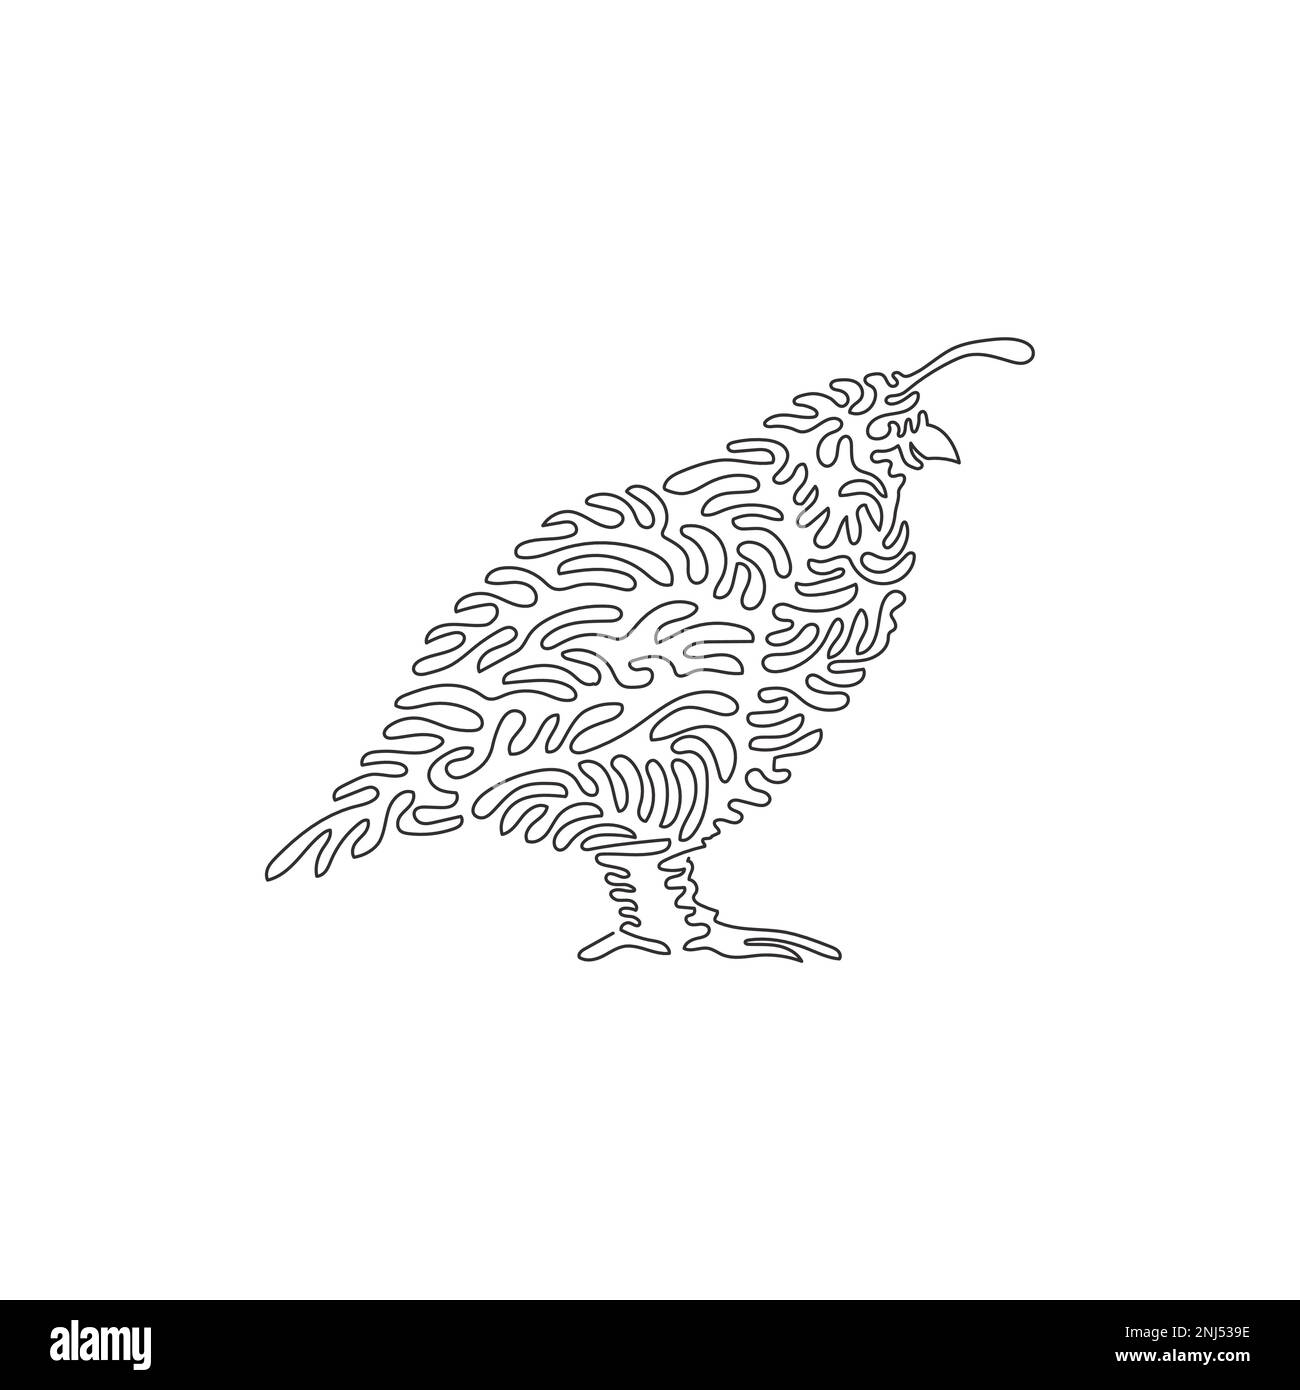 Single curly one line drawing of lively little birds abstract art. Continuous line draw graphic design vector illustration of quail head plume curling Stock Vector